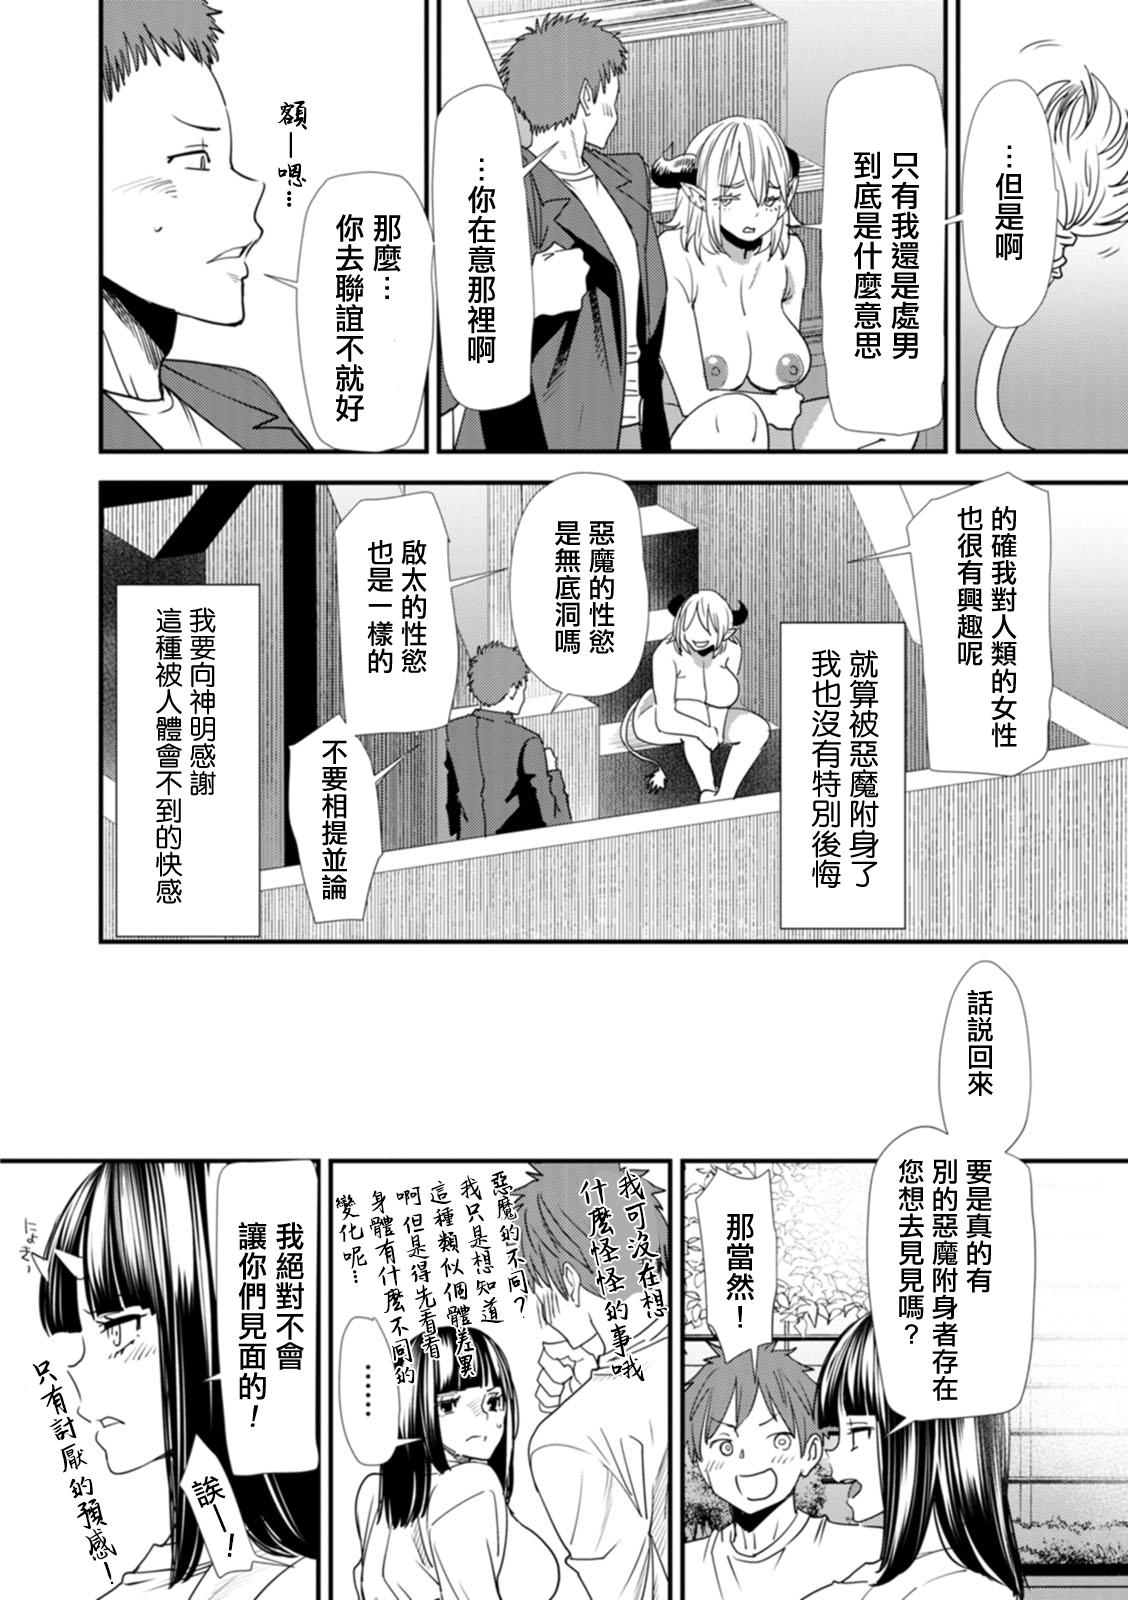 Inma Joshi Daisei no Yuuutsu - The Melancholy of the Succubus who is a college student Ch. 9 19